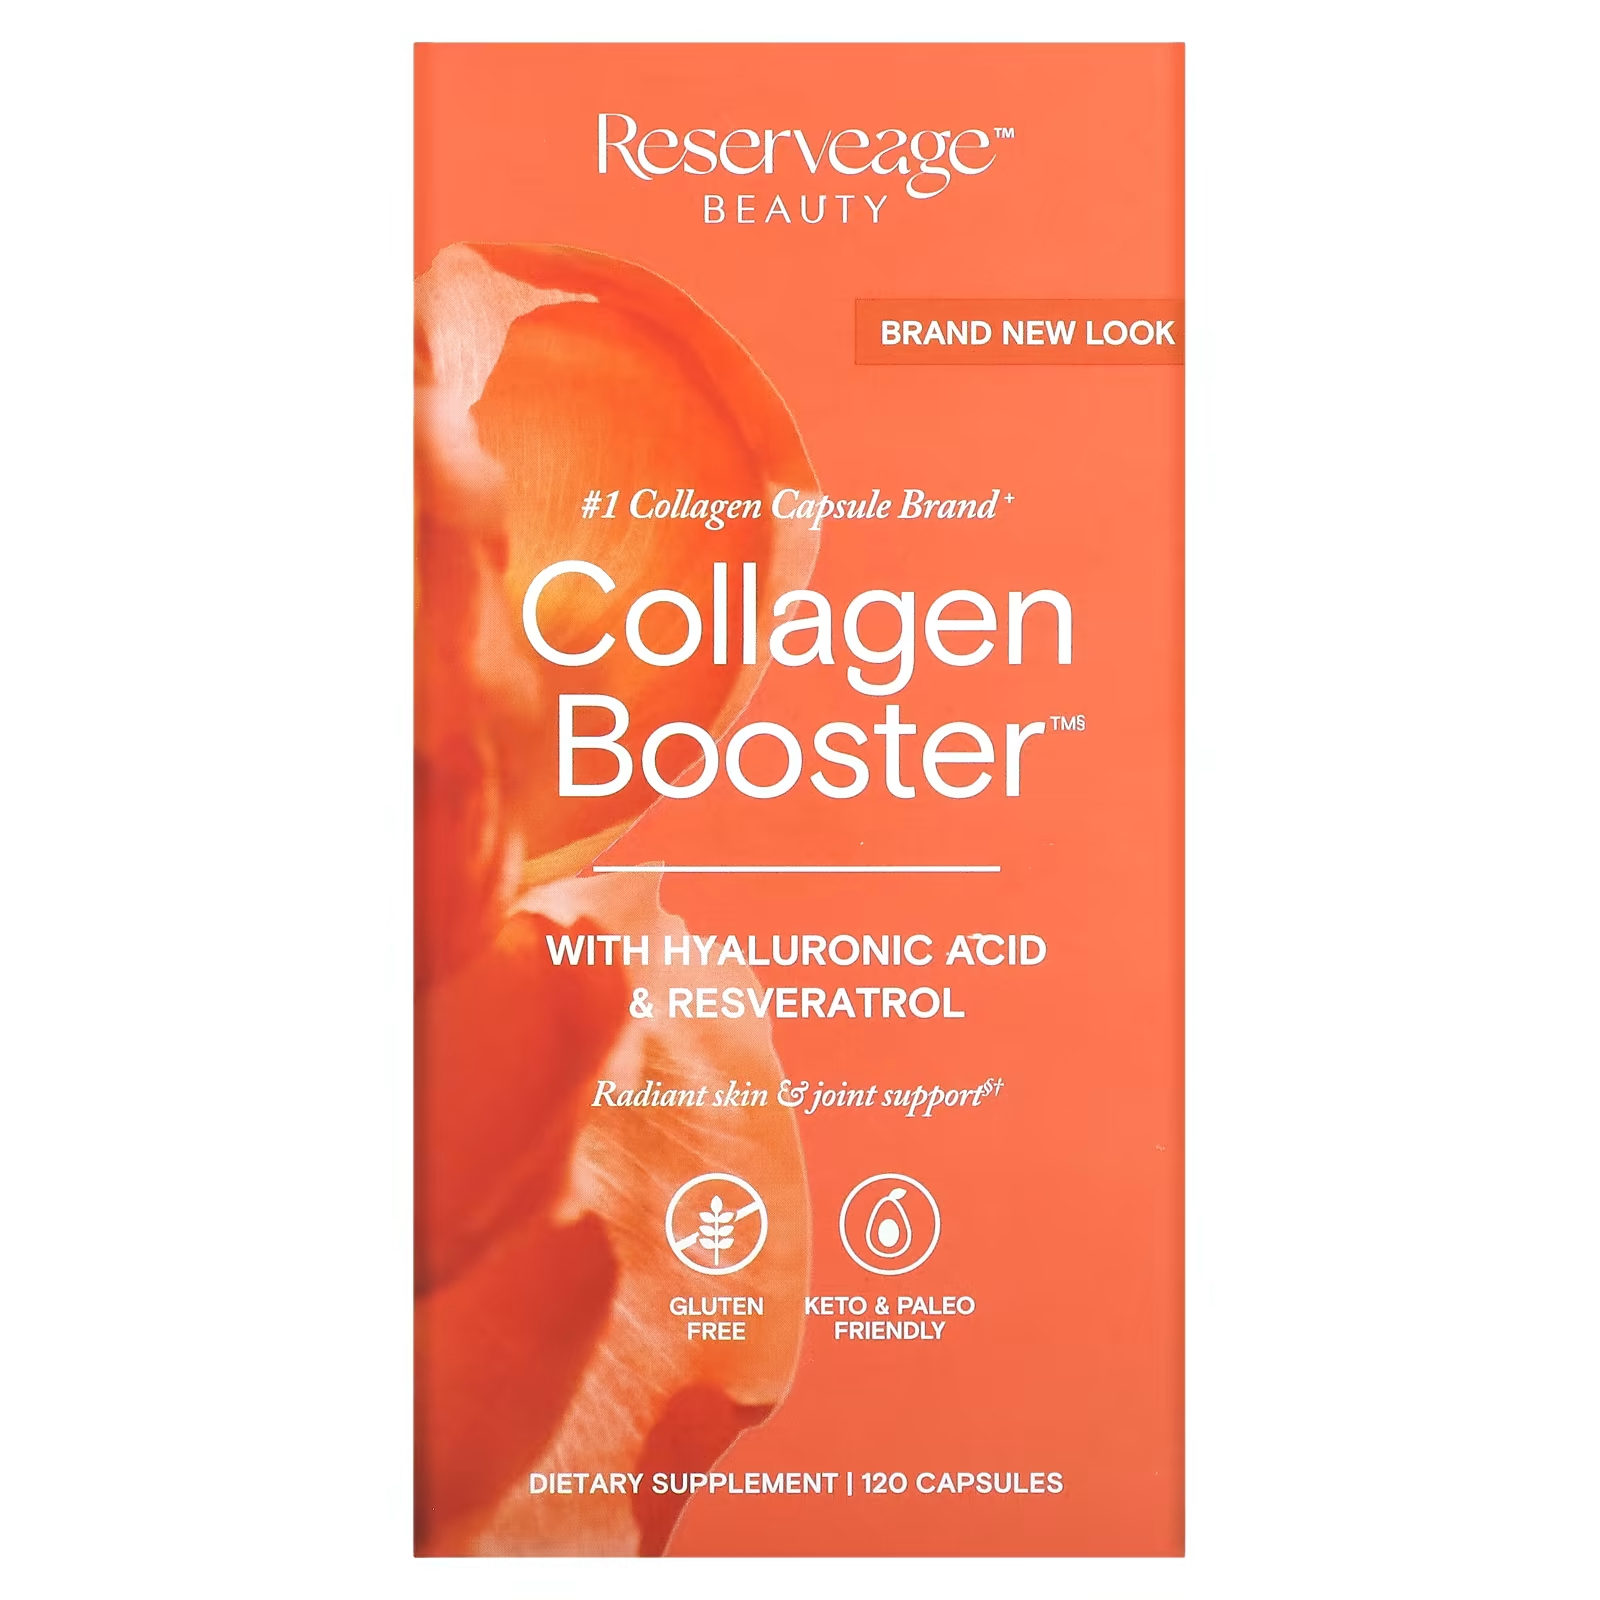 Пищевая добавка Reserveage Nutrition Collagen Booster with Hyaluronic Acid & Resveratrol, 120 капсул